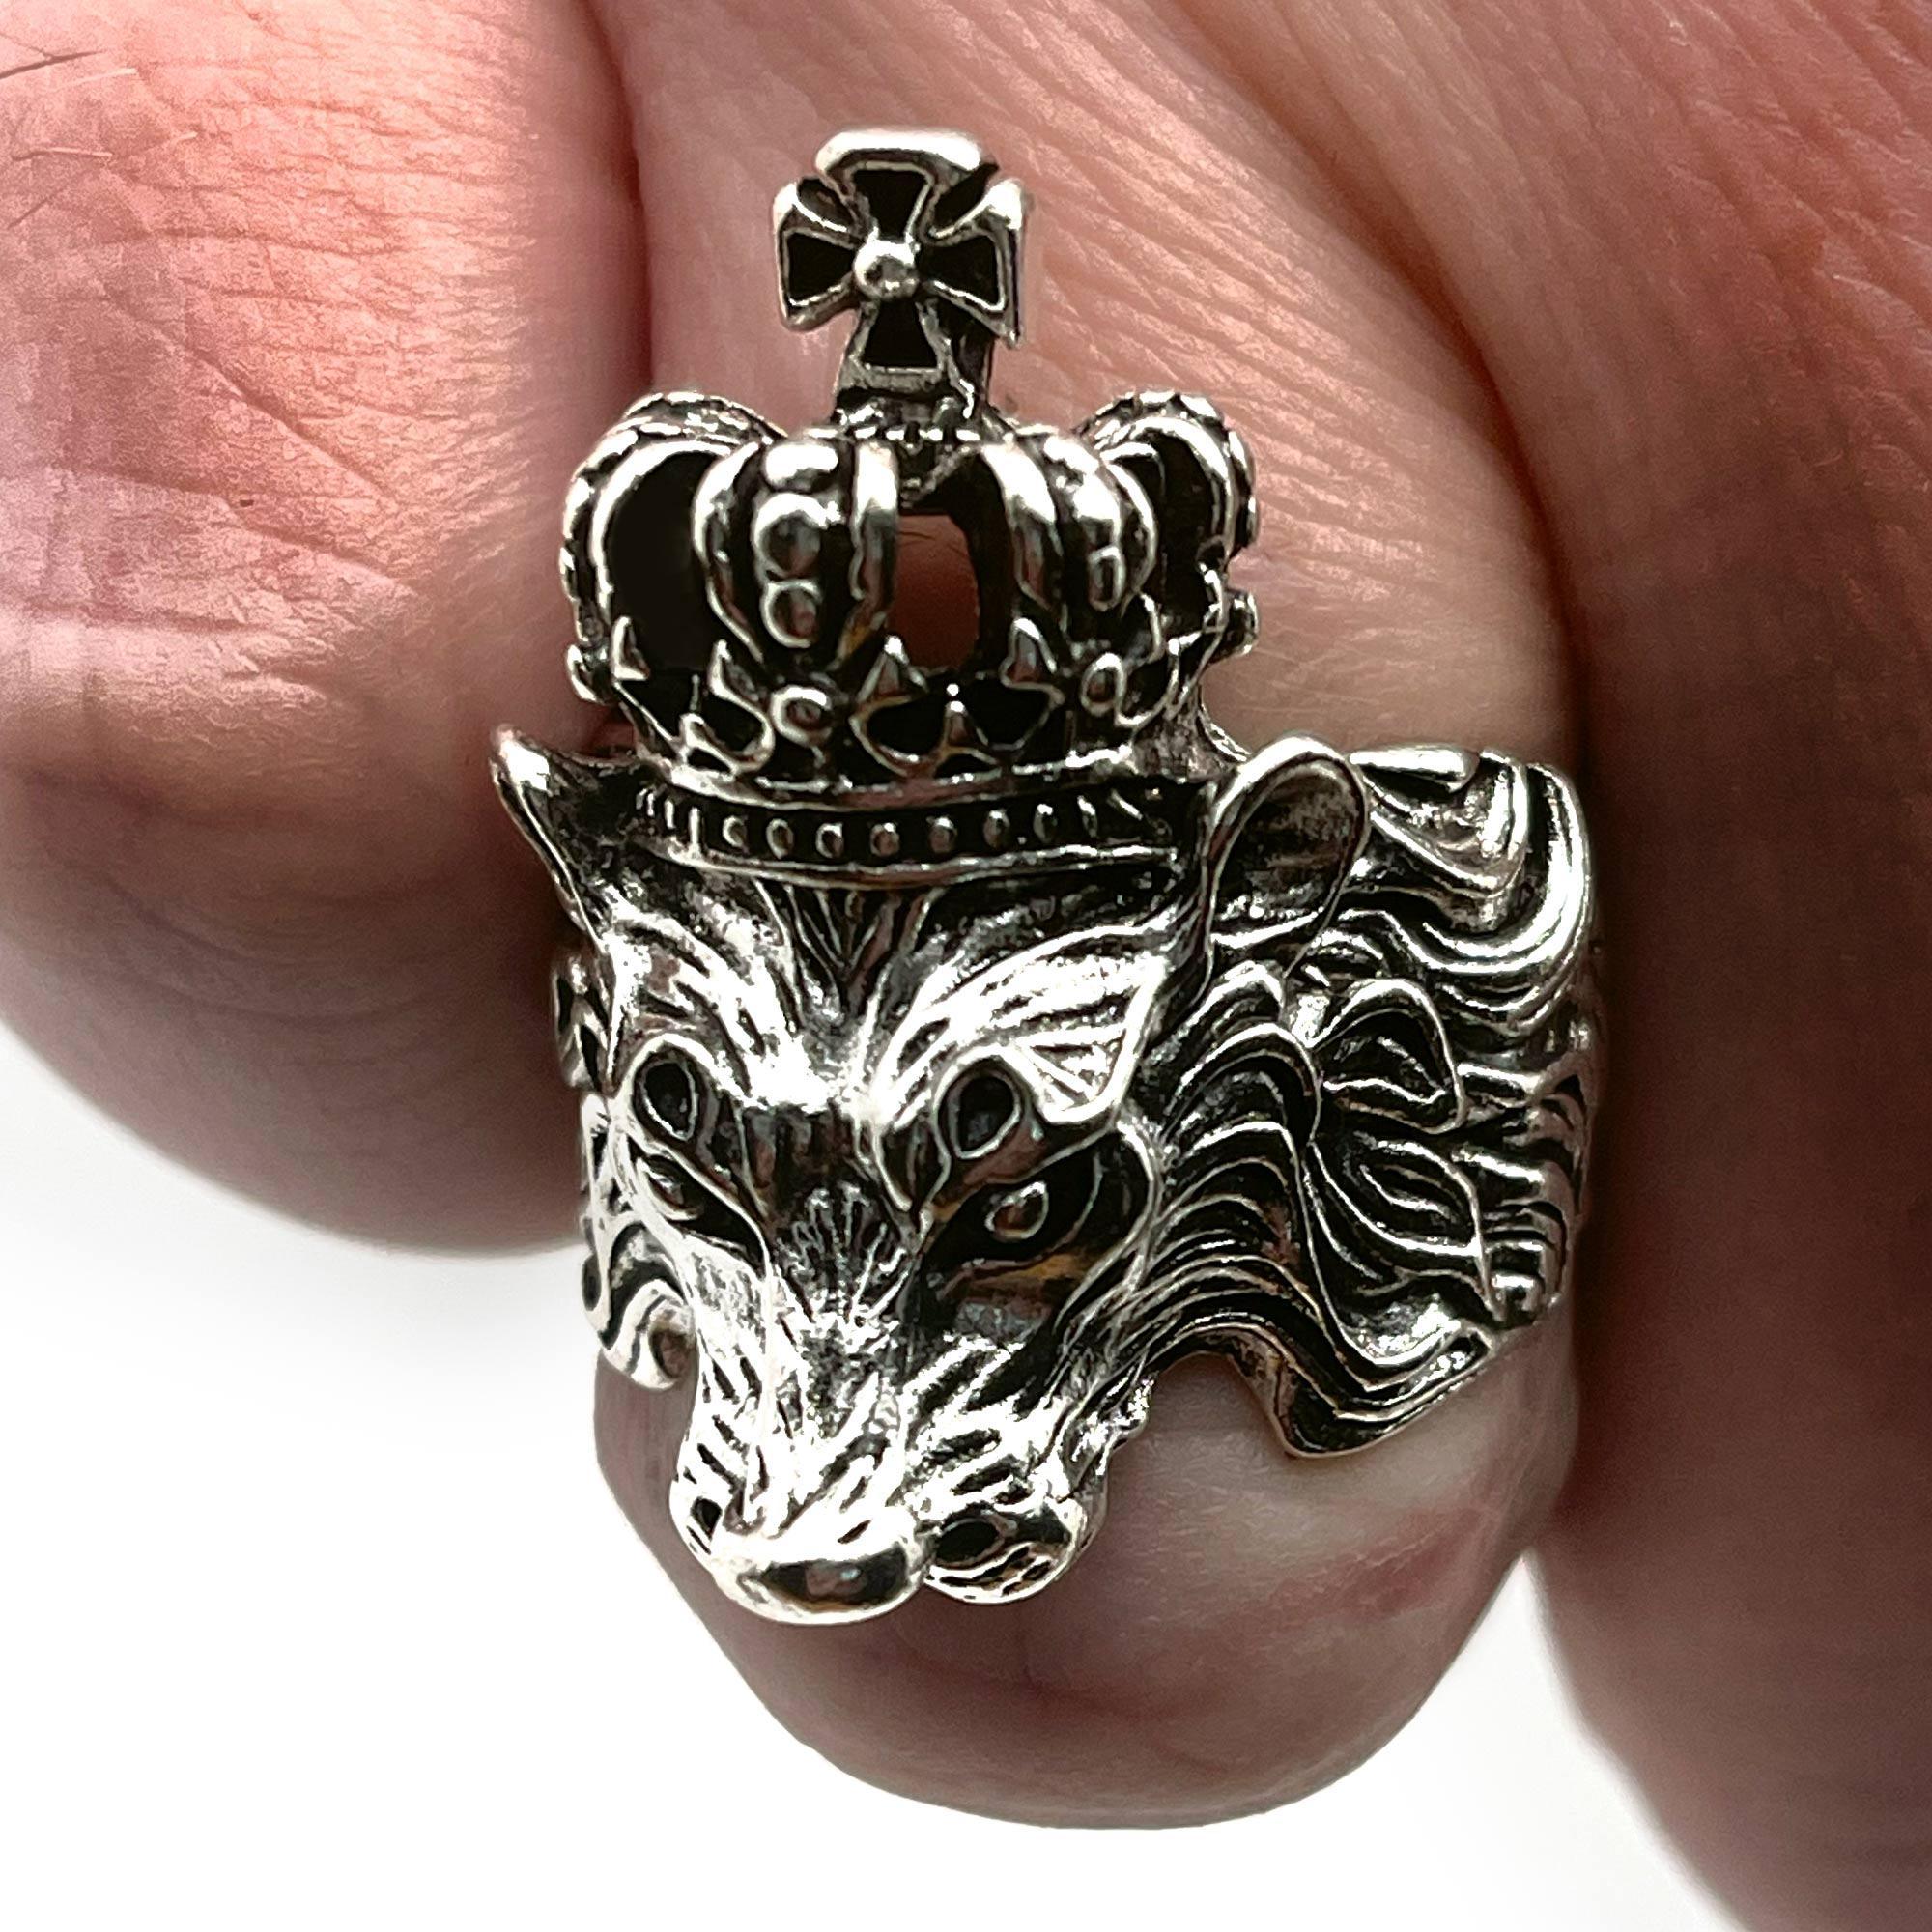 "Hail to the King" Resizable Lion Ring - No System